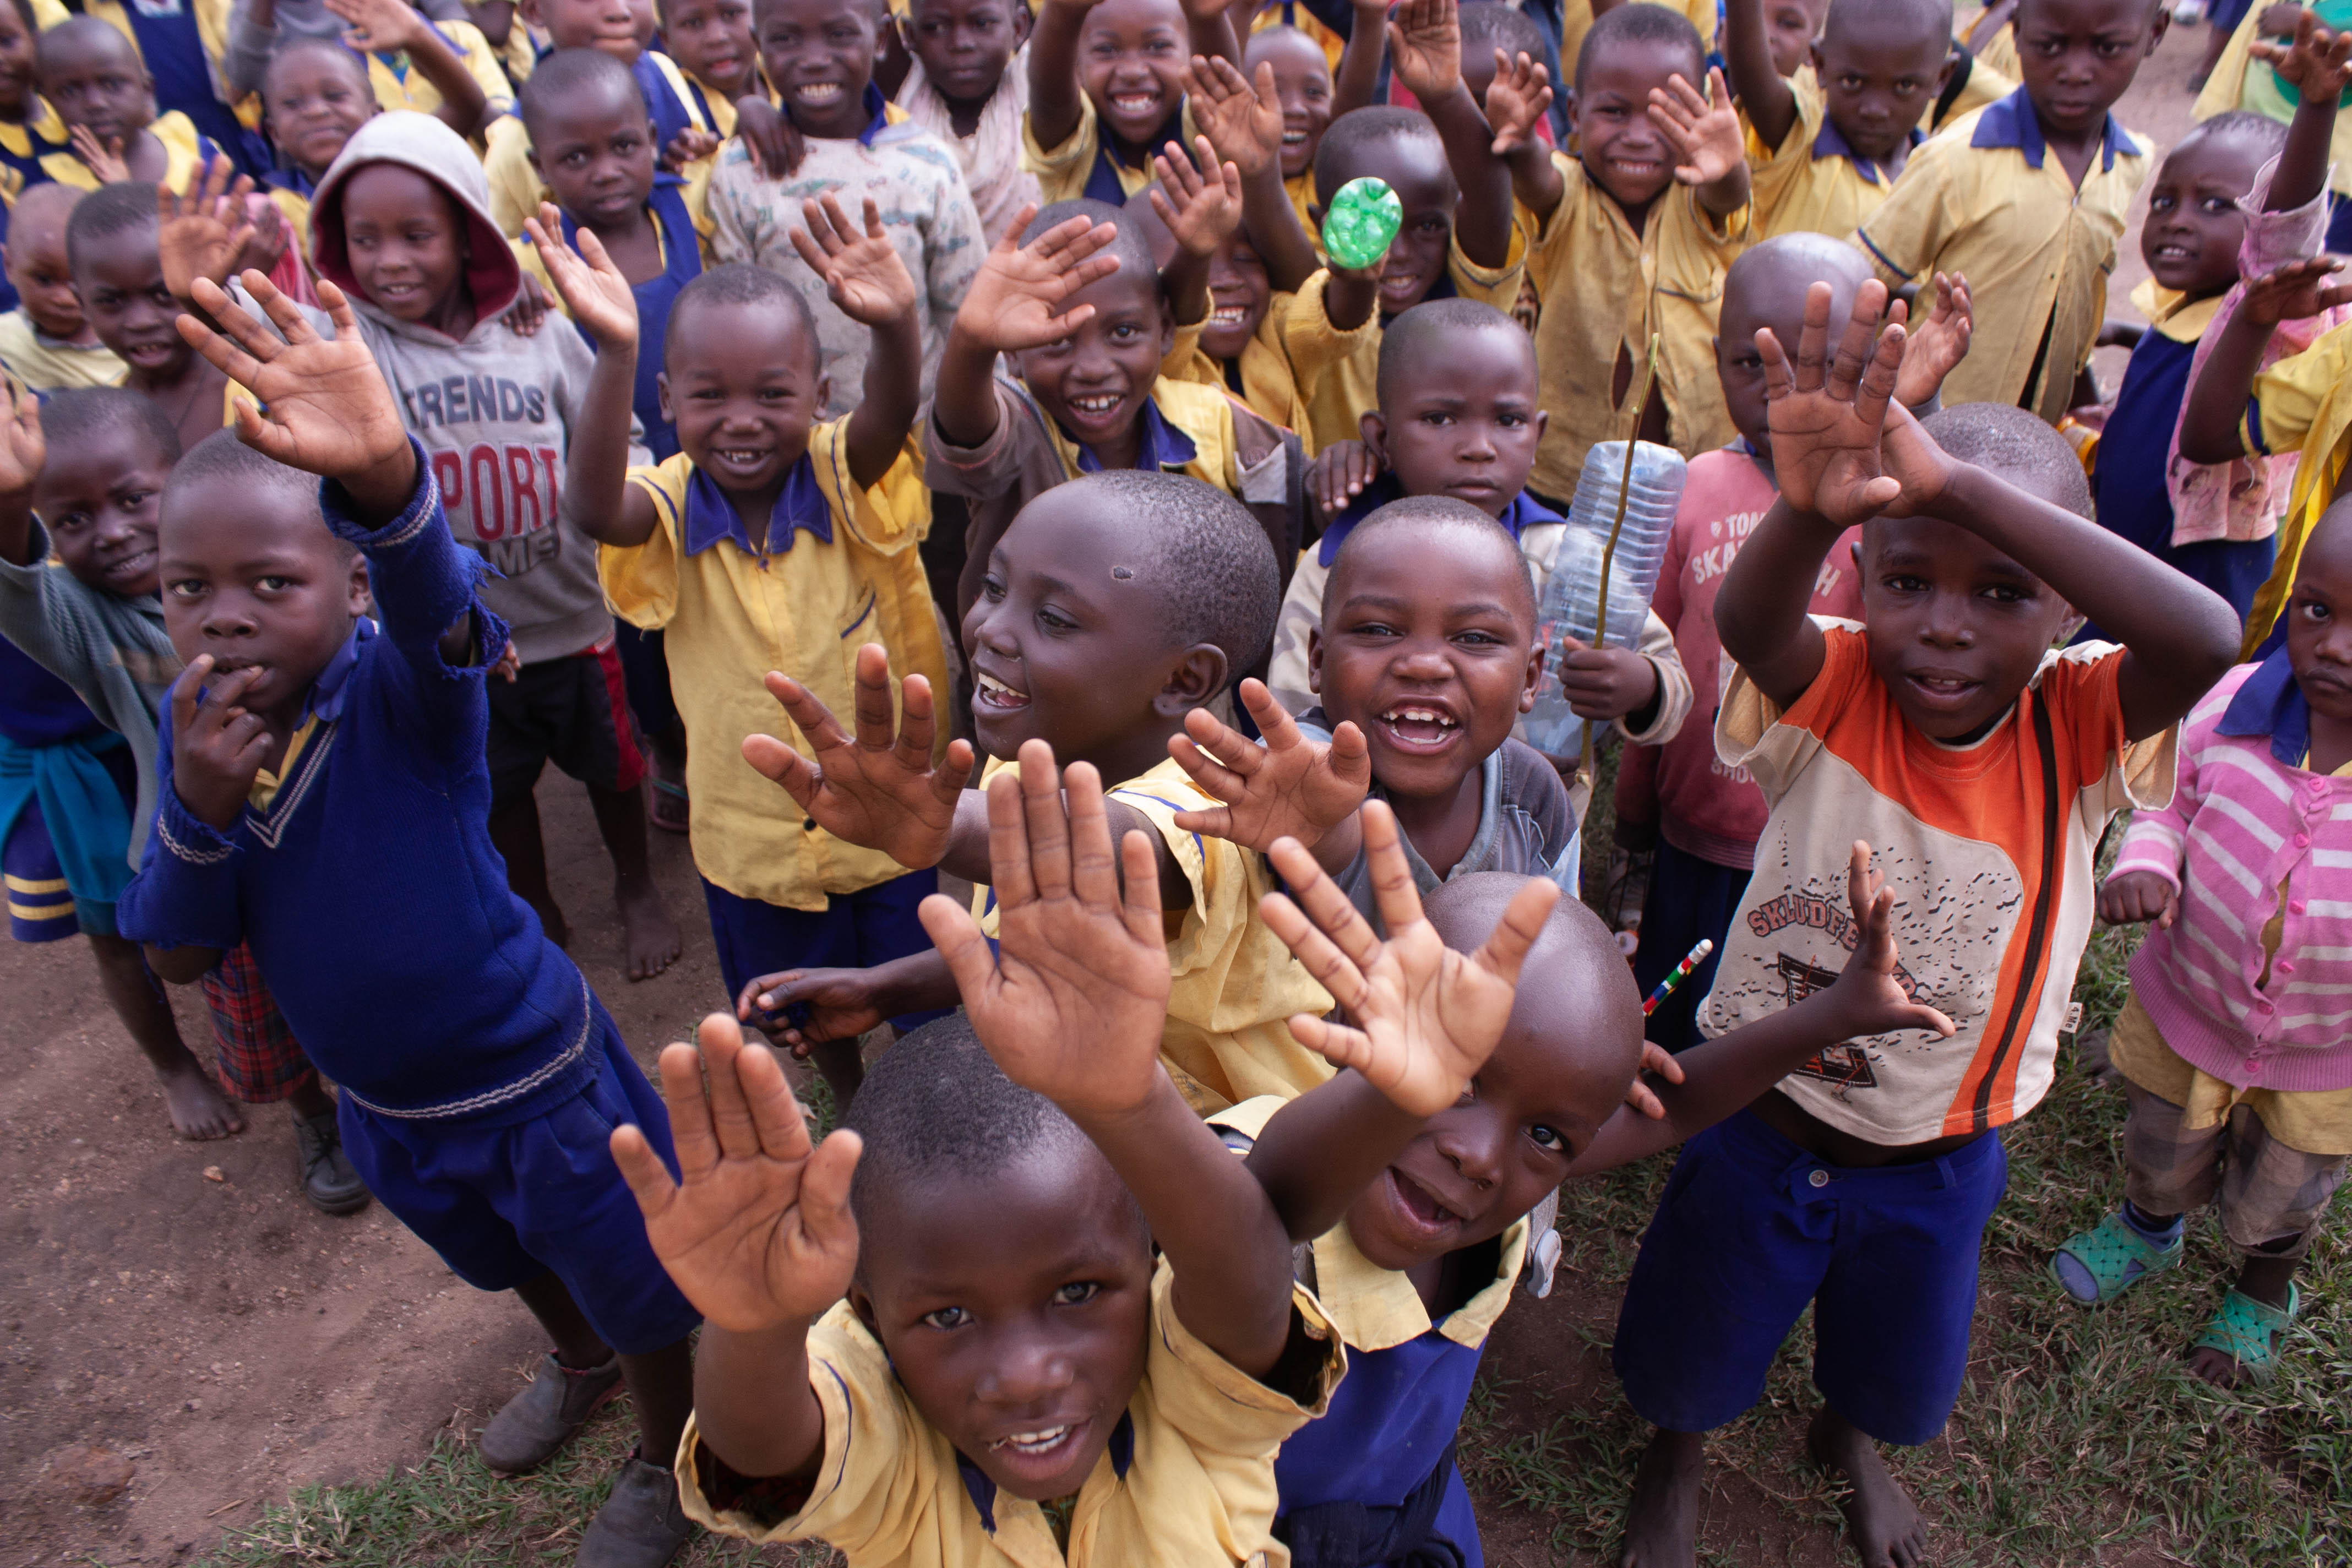 A group of school children excitedly smile and wave at the camera.